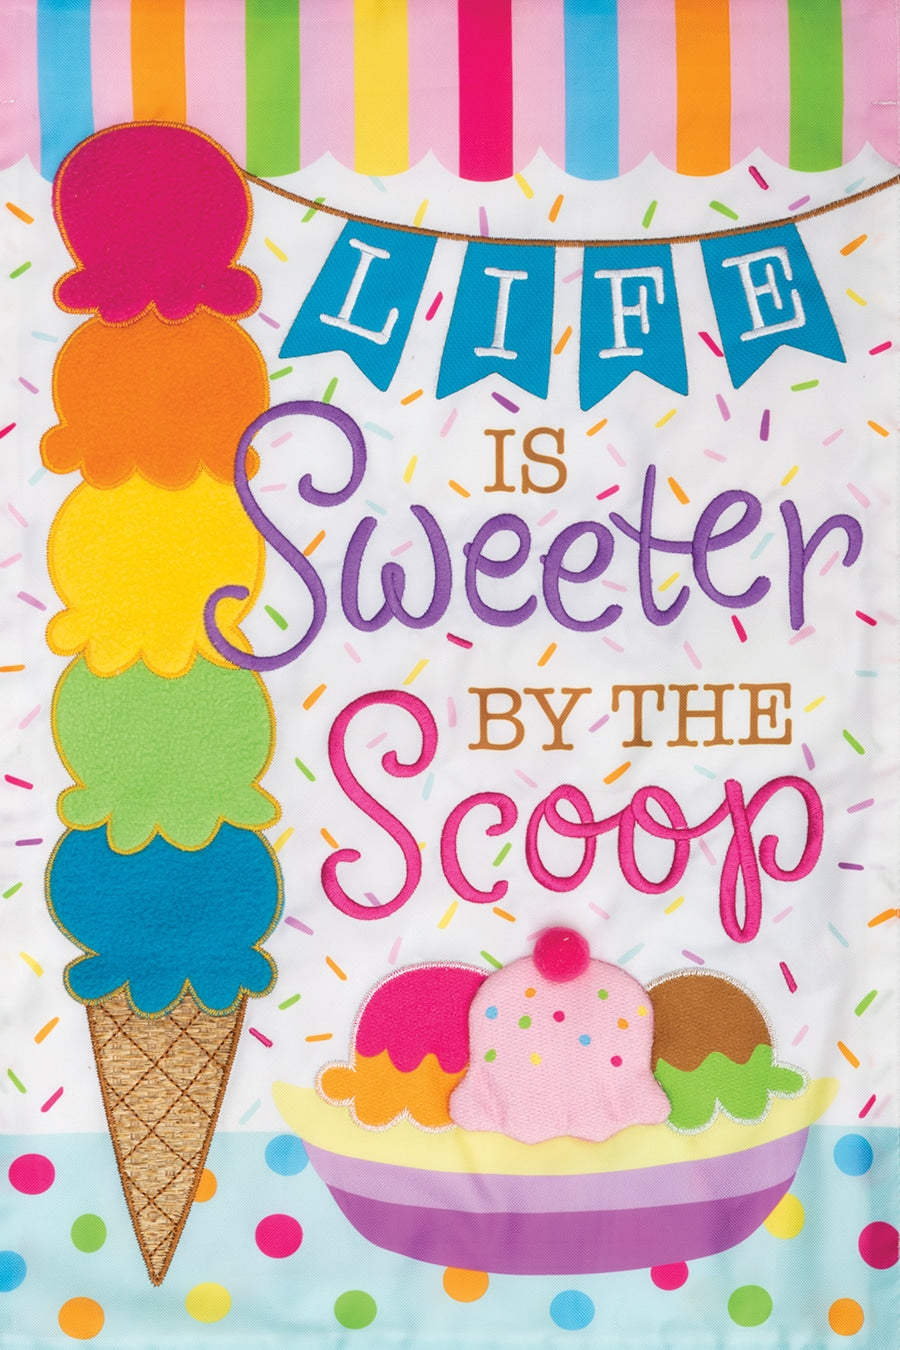 Applique-Life is Sweeter by the Scoop